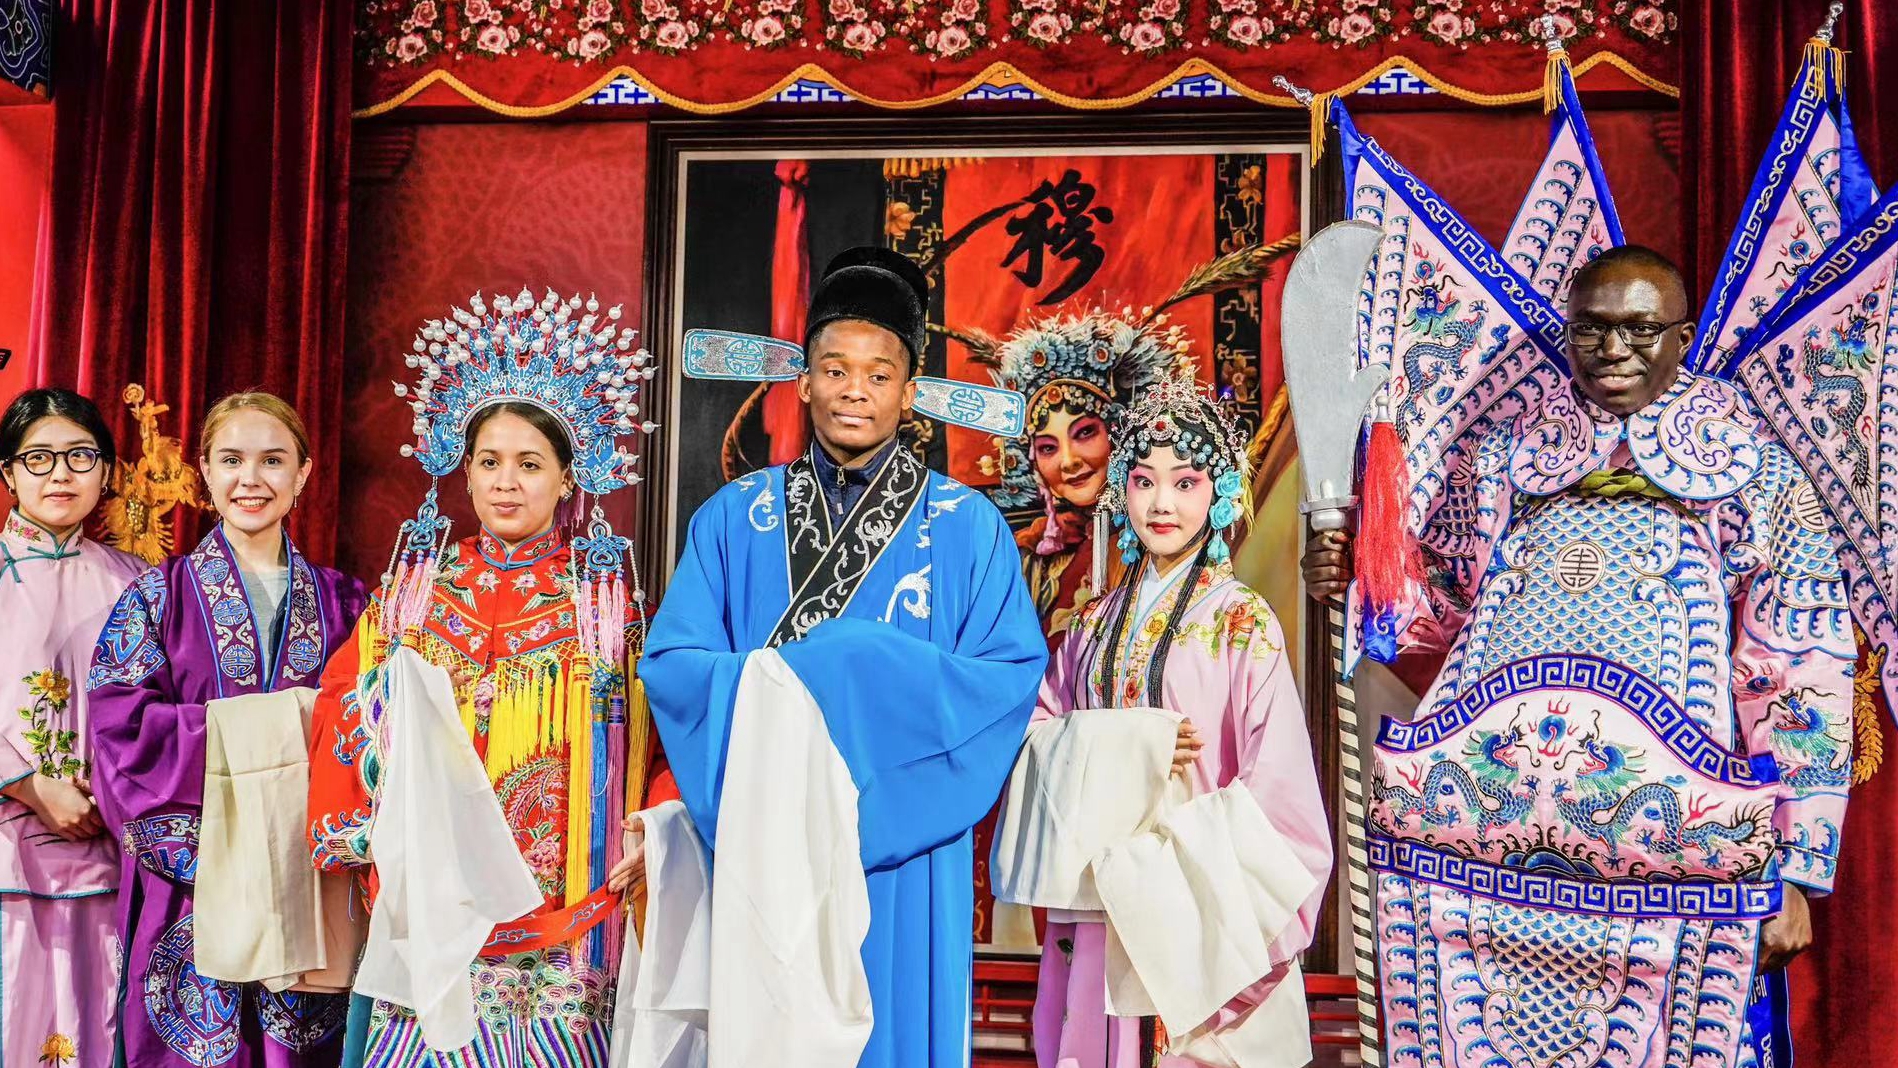 International students invited to experience traditional Yu opera in Henan